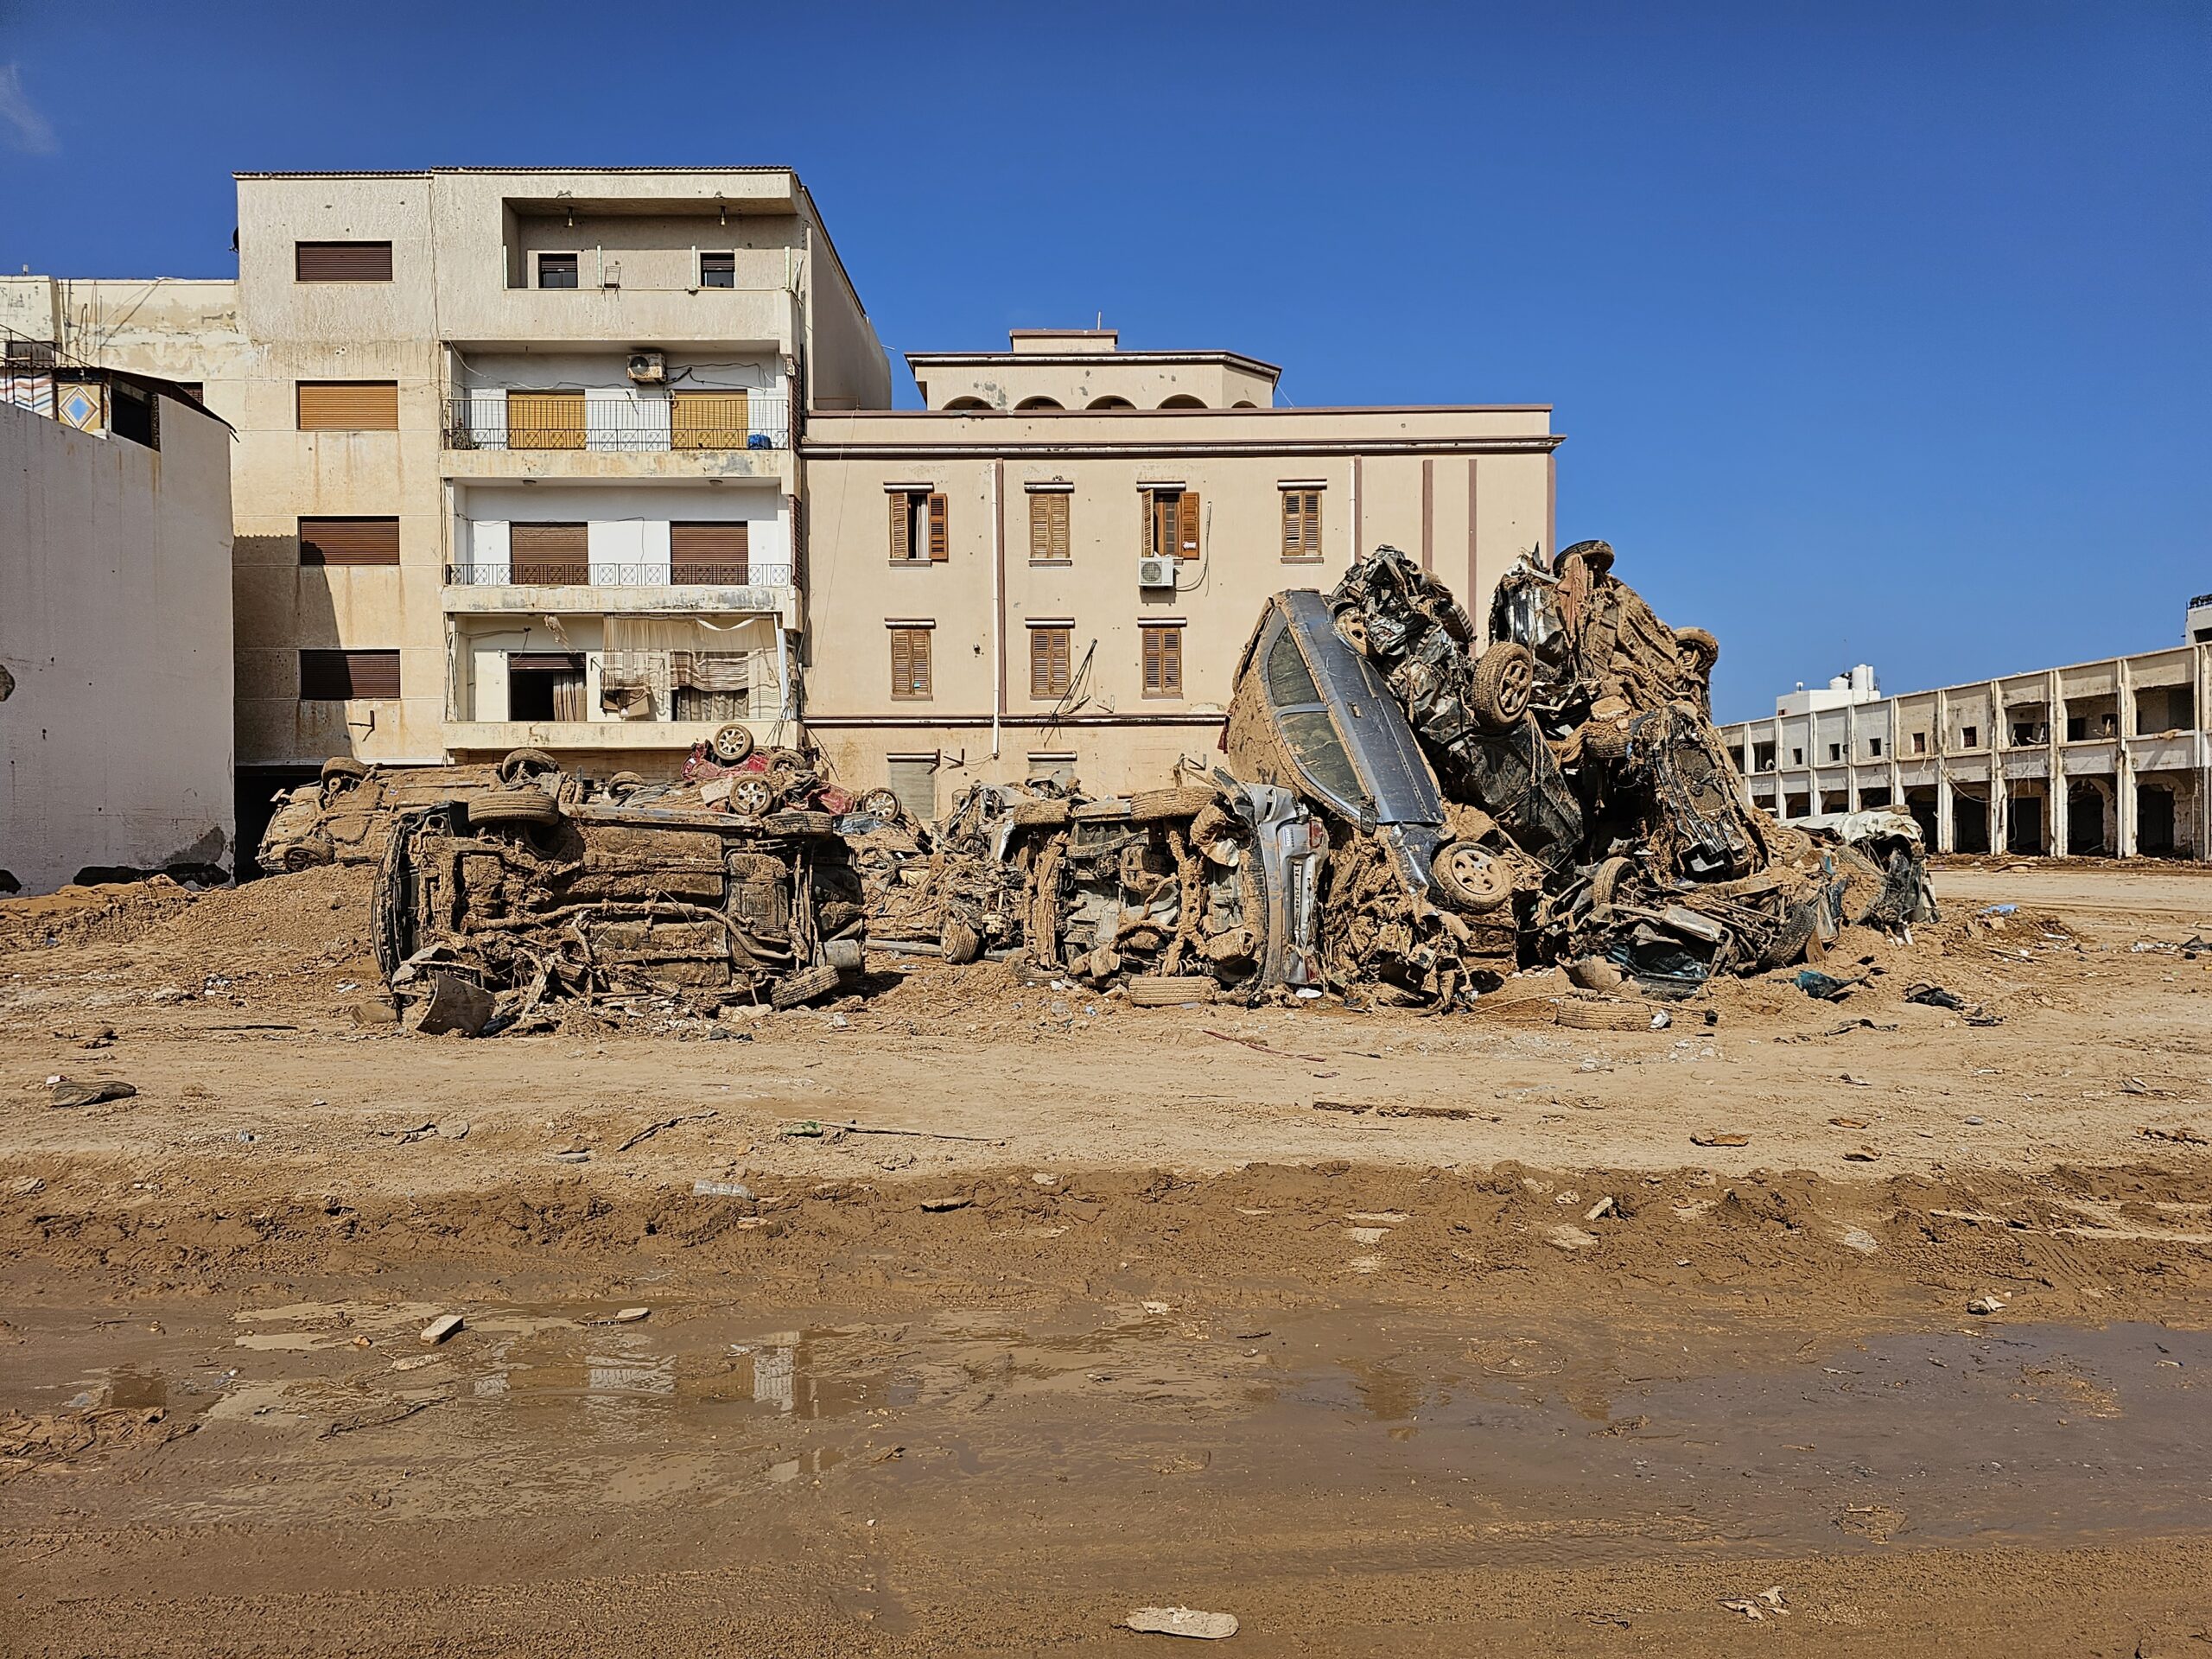 A pile of destroyed cars covered in mud from floodwaters sits on the side of the road in Libya.